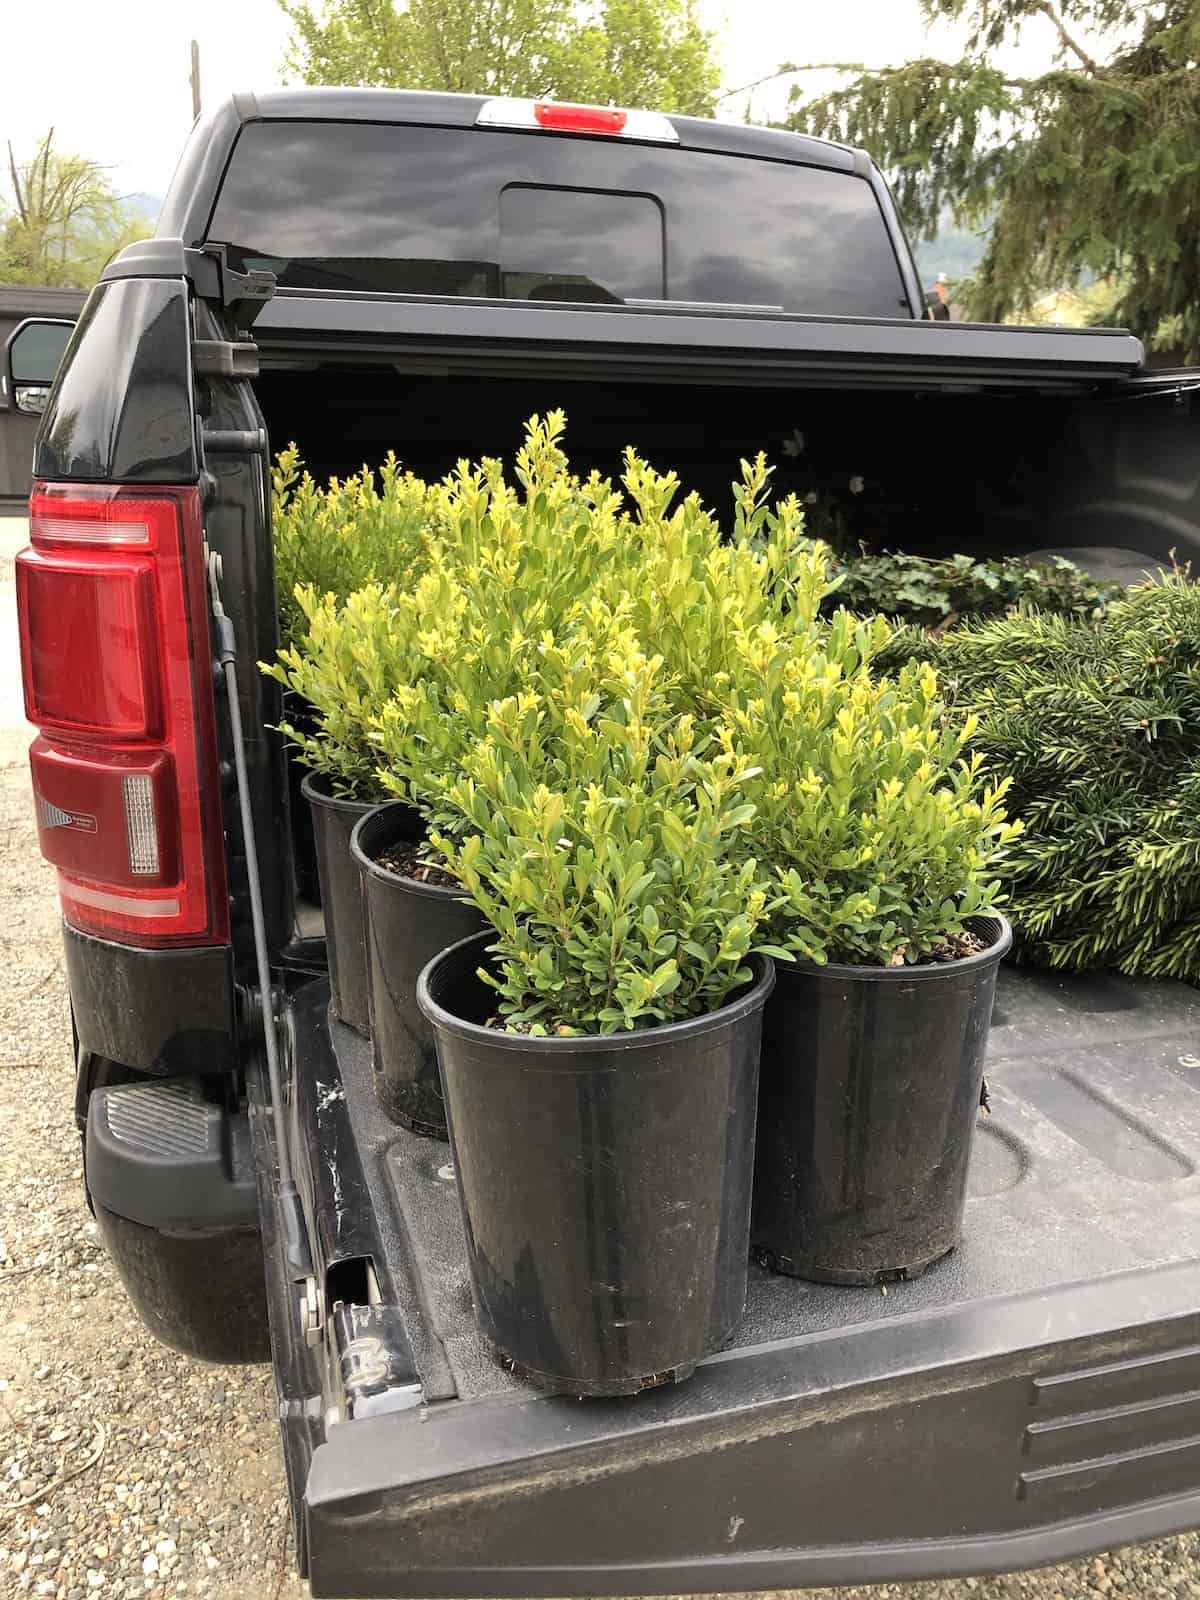 Planting boxwood shrubs for fall curb appeal